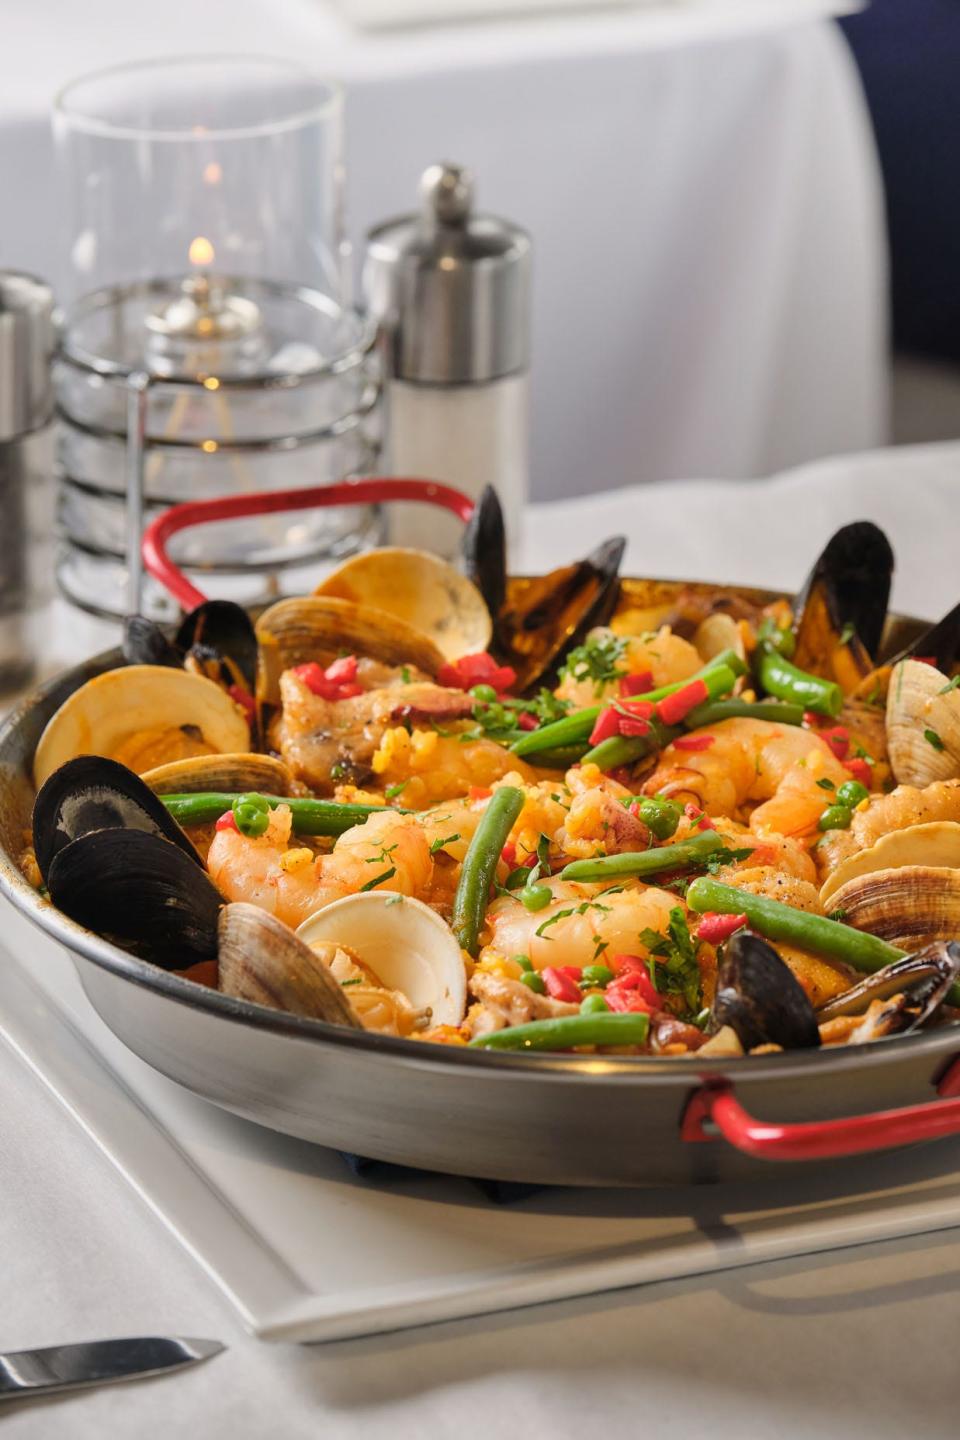 Paella Night at PB Catch will feature seafood paella.